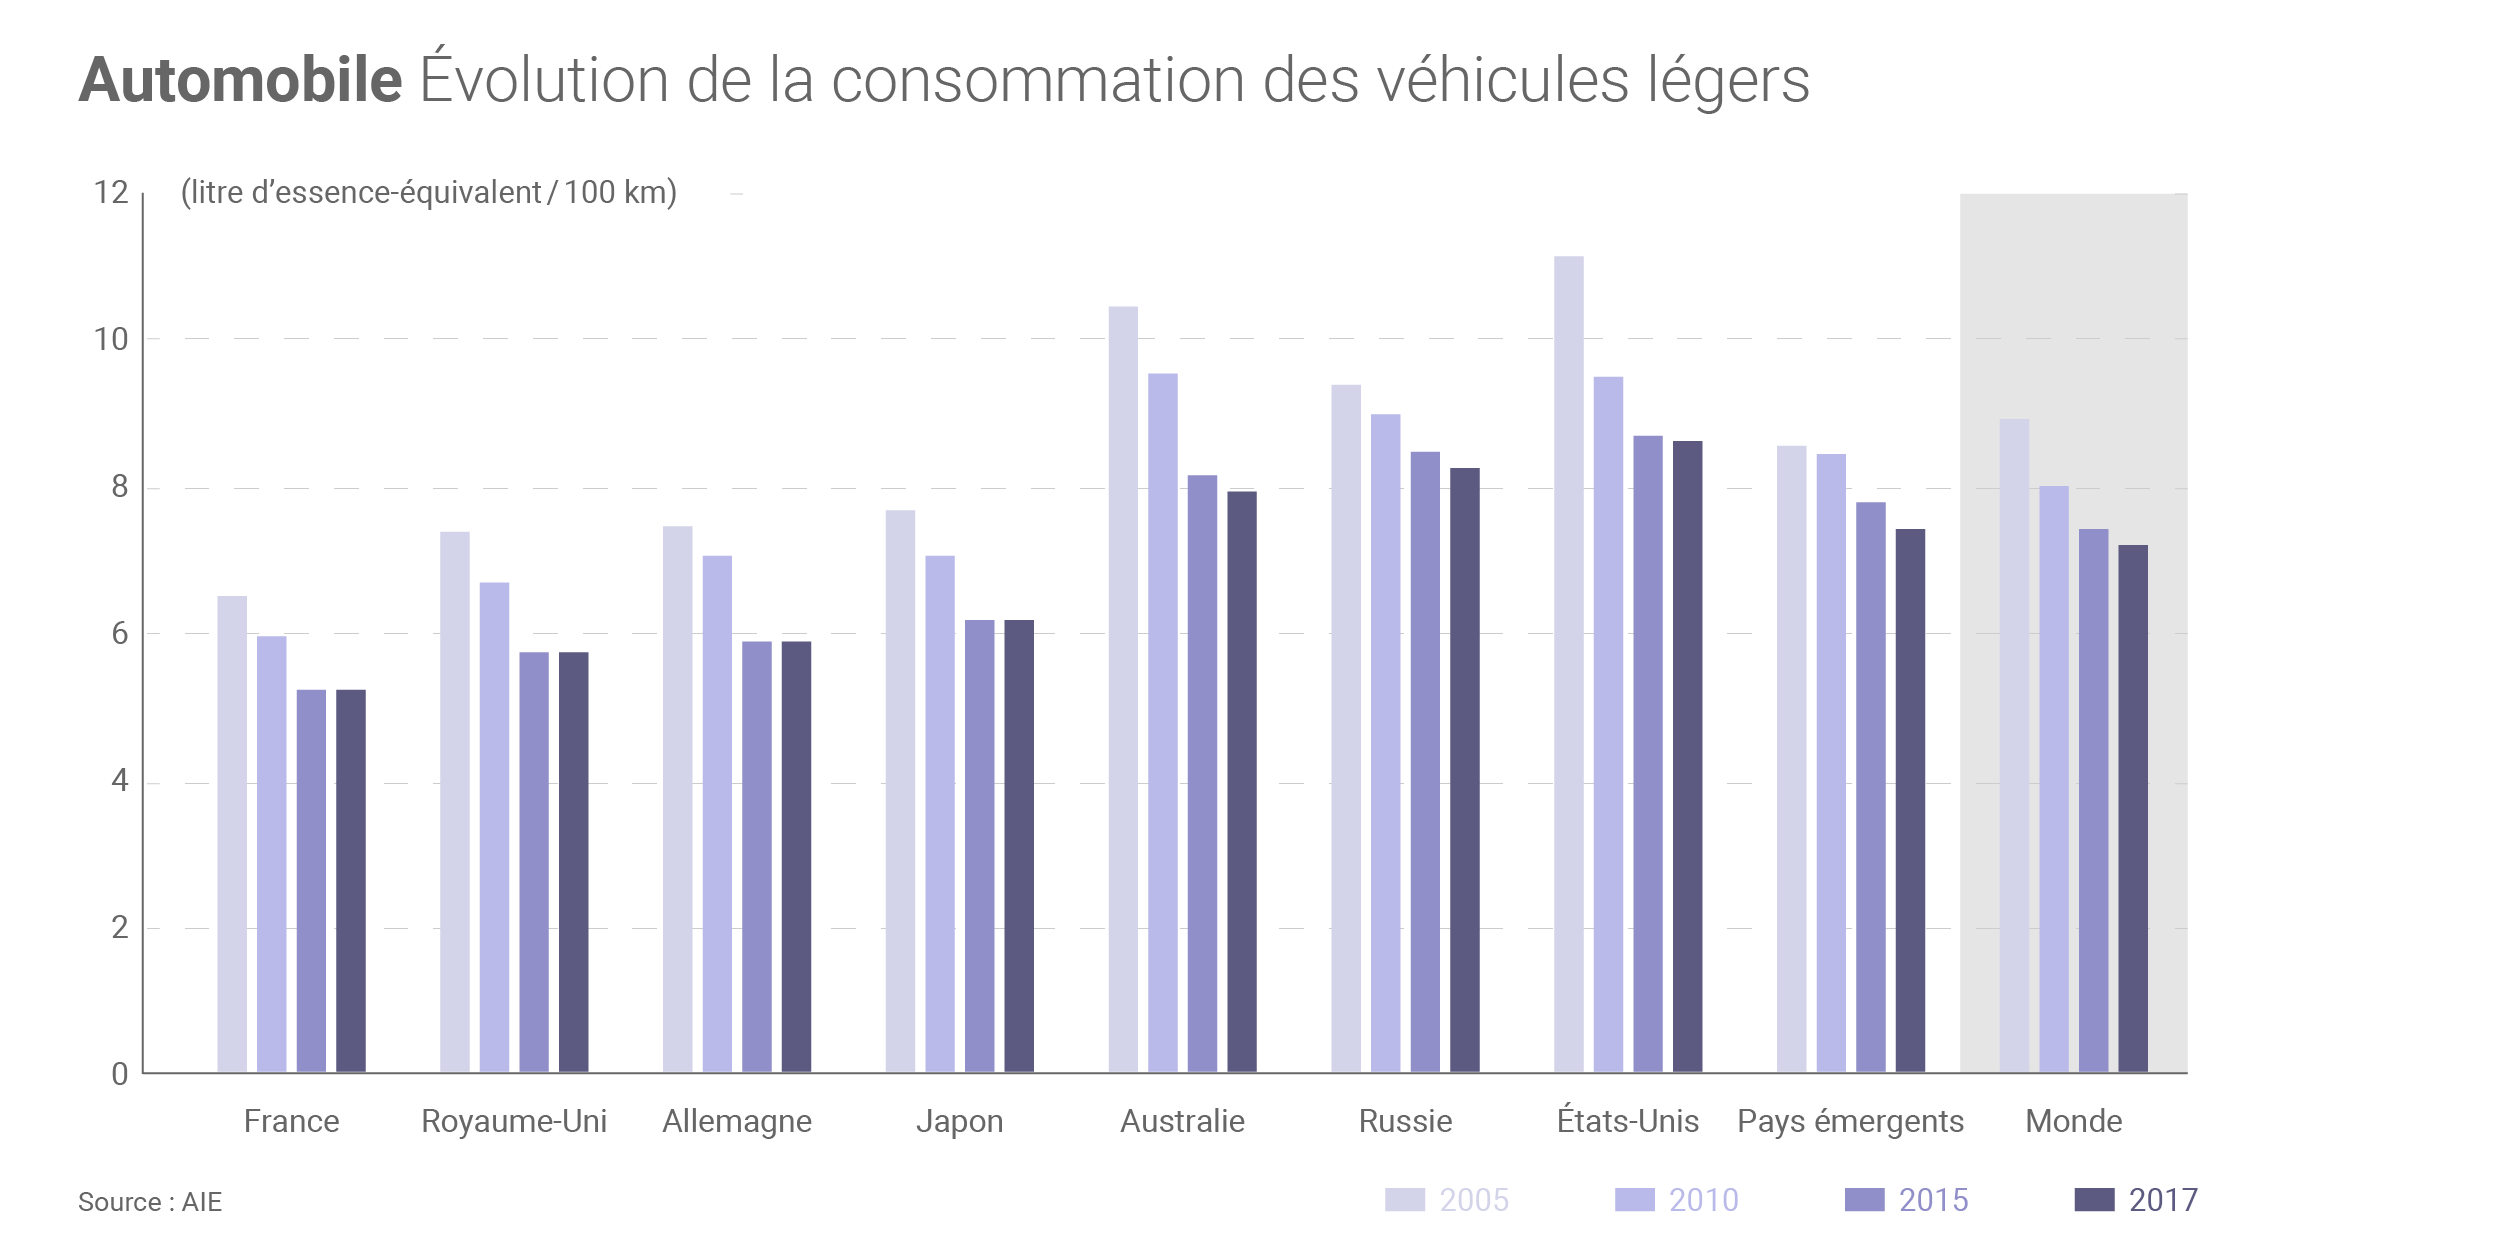 https://www.connaissancedesenergies.org/sites/default/files/image_article/consommation-vehicules-legers_zoom.png